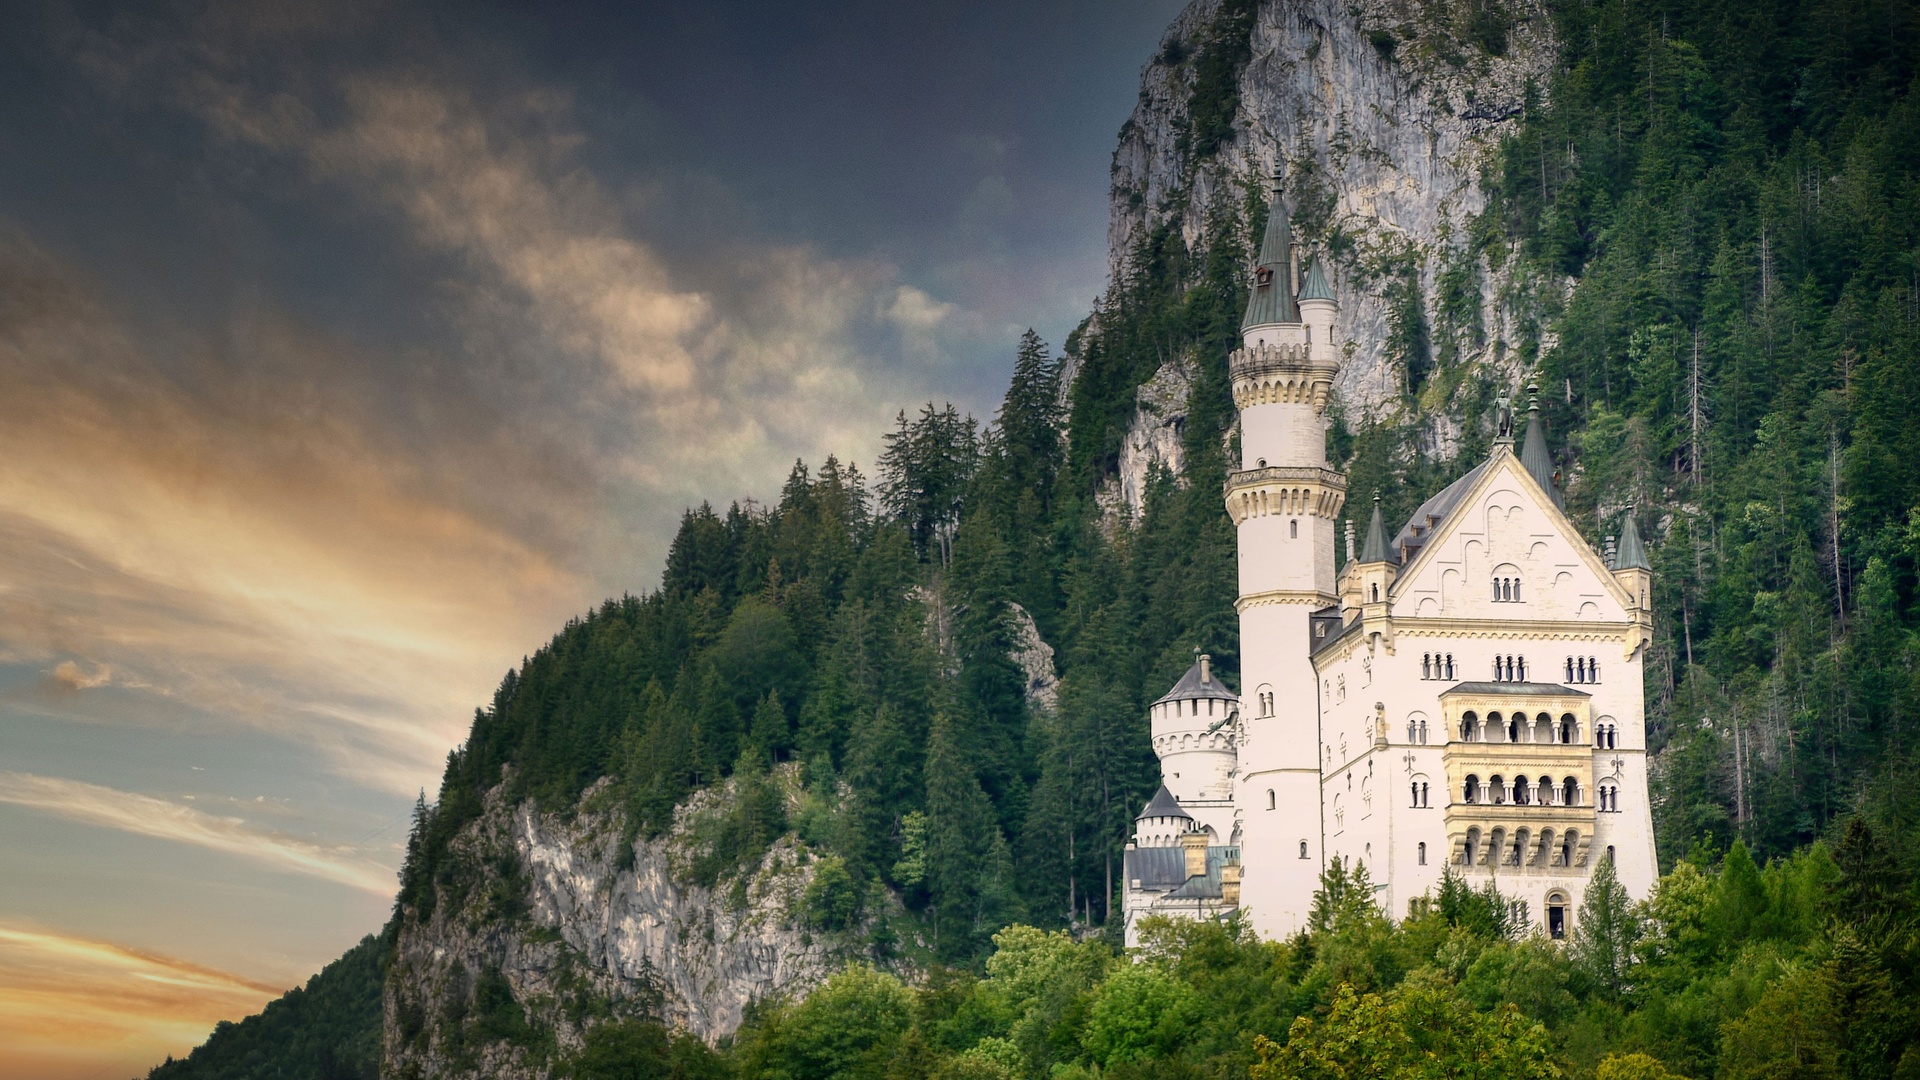 Architecture Castle Neuschwanstein Castle Germany Tower Trees Forest Rock Clouds Ancient 1920x1080